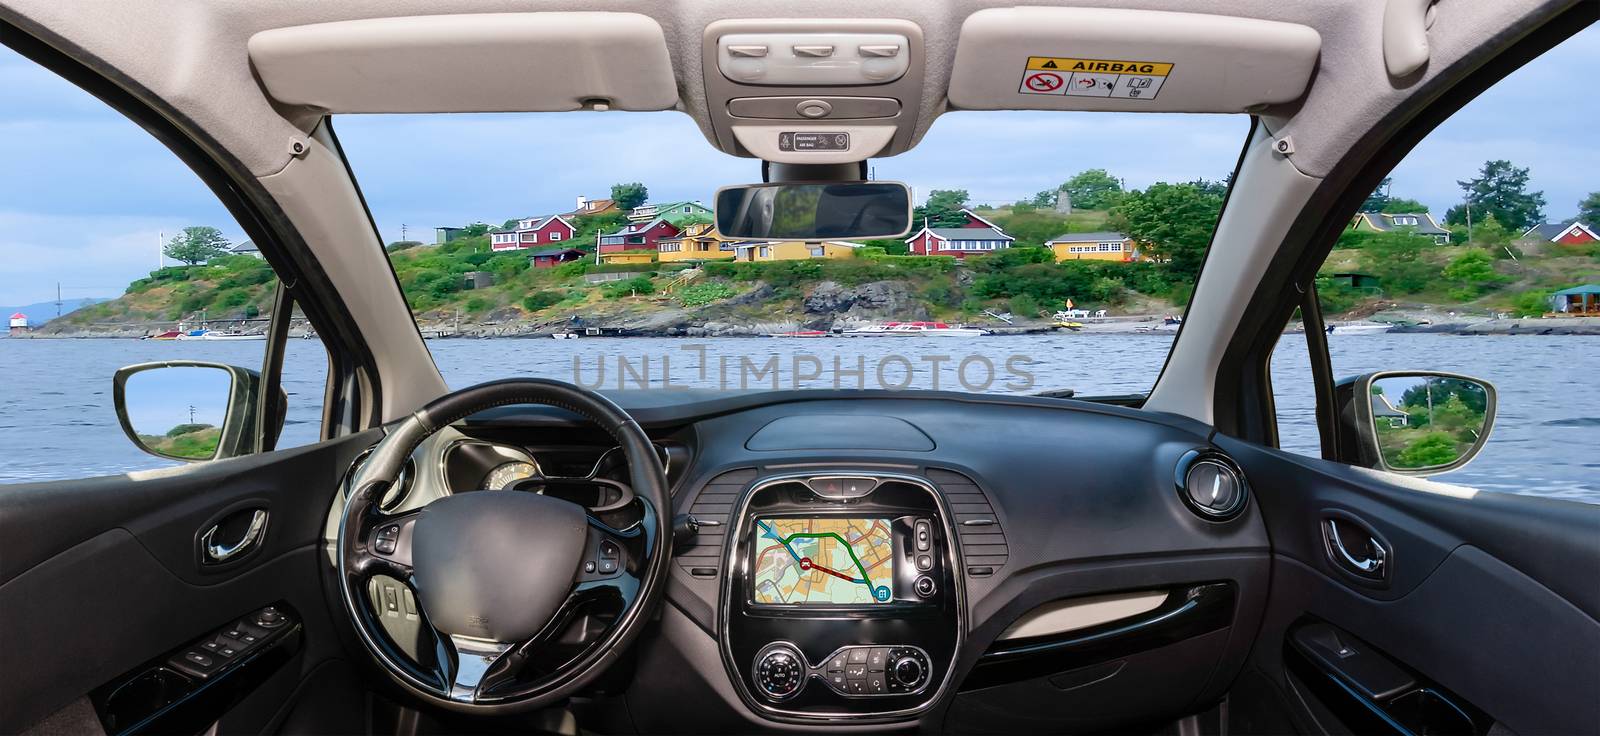 Looking through a car windshield with view over colorful houses on the shore of Oslo fjord, Oslo, Norway